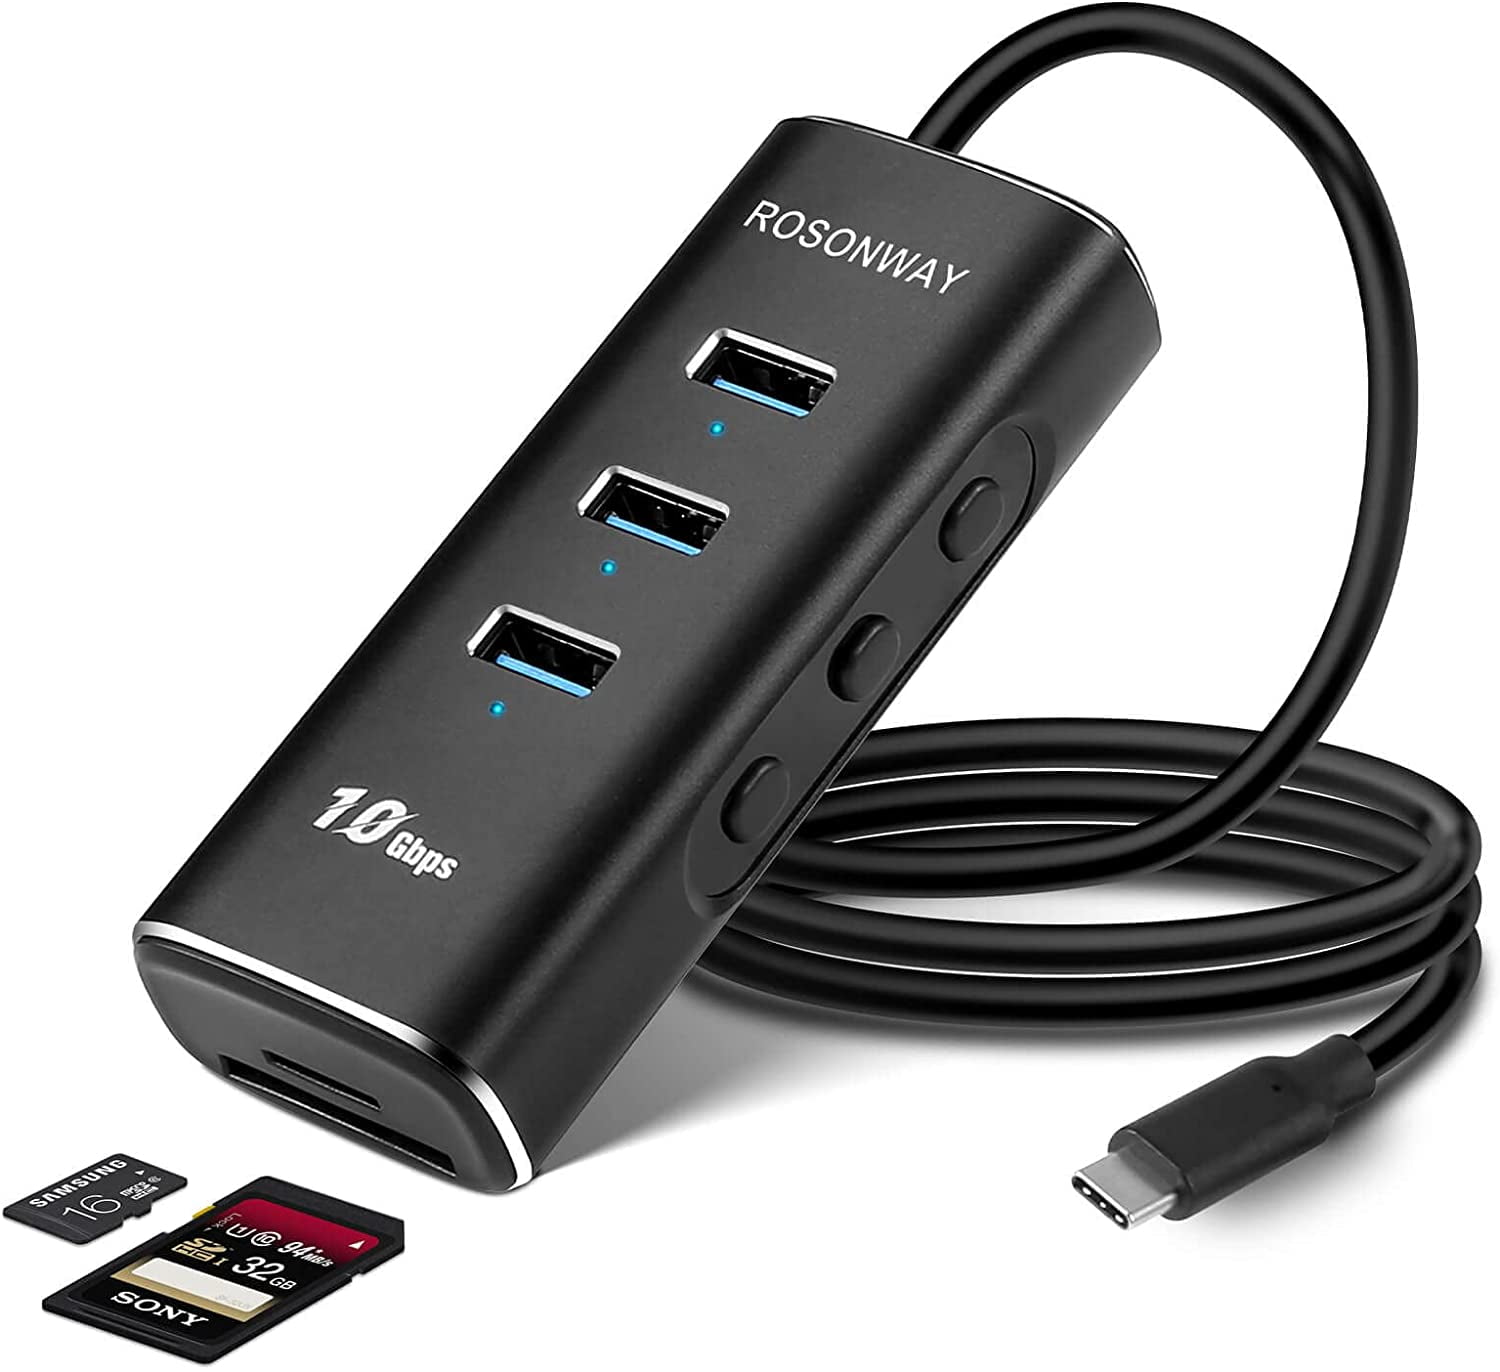 USB C Hub, Aluminum 5-in-1 3.1 Gen 2 Hub with 10Gbps Data Ports and SD/TF Card Reader, Thunderbolt 3 Compatible, A104D - Walmart.com